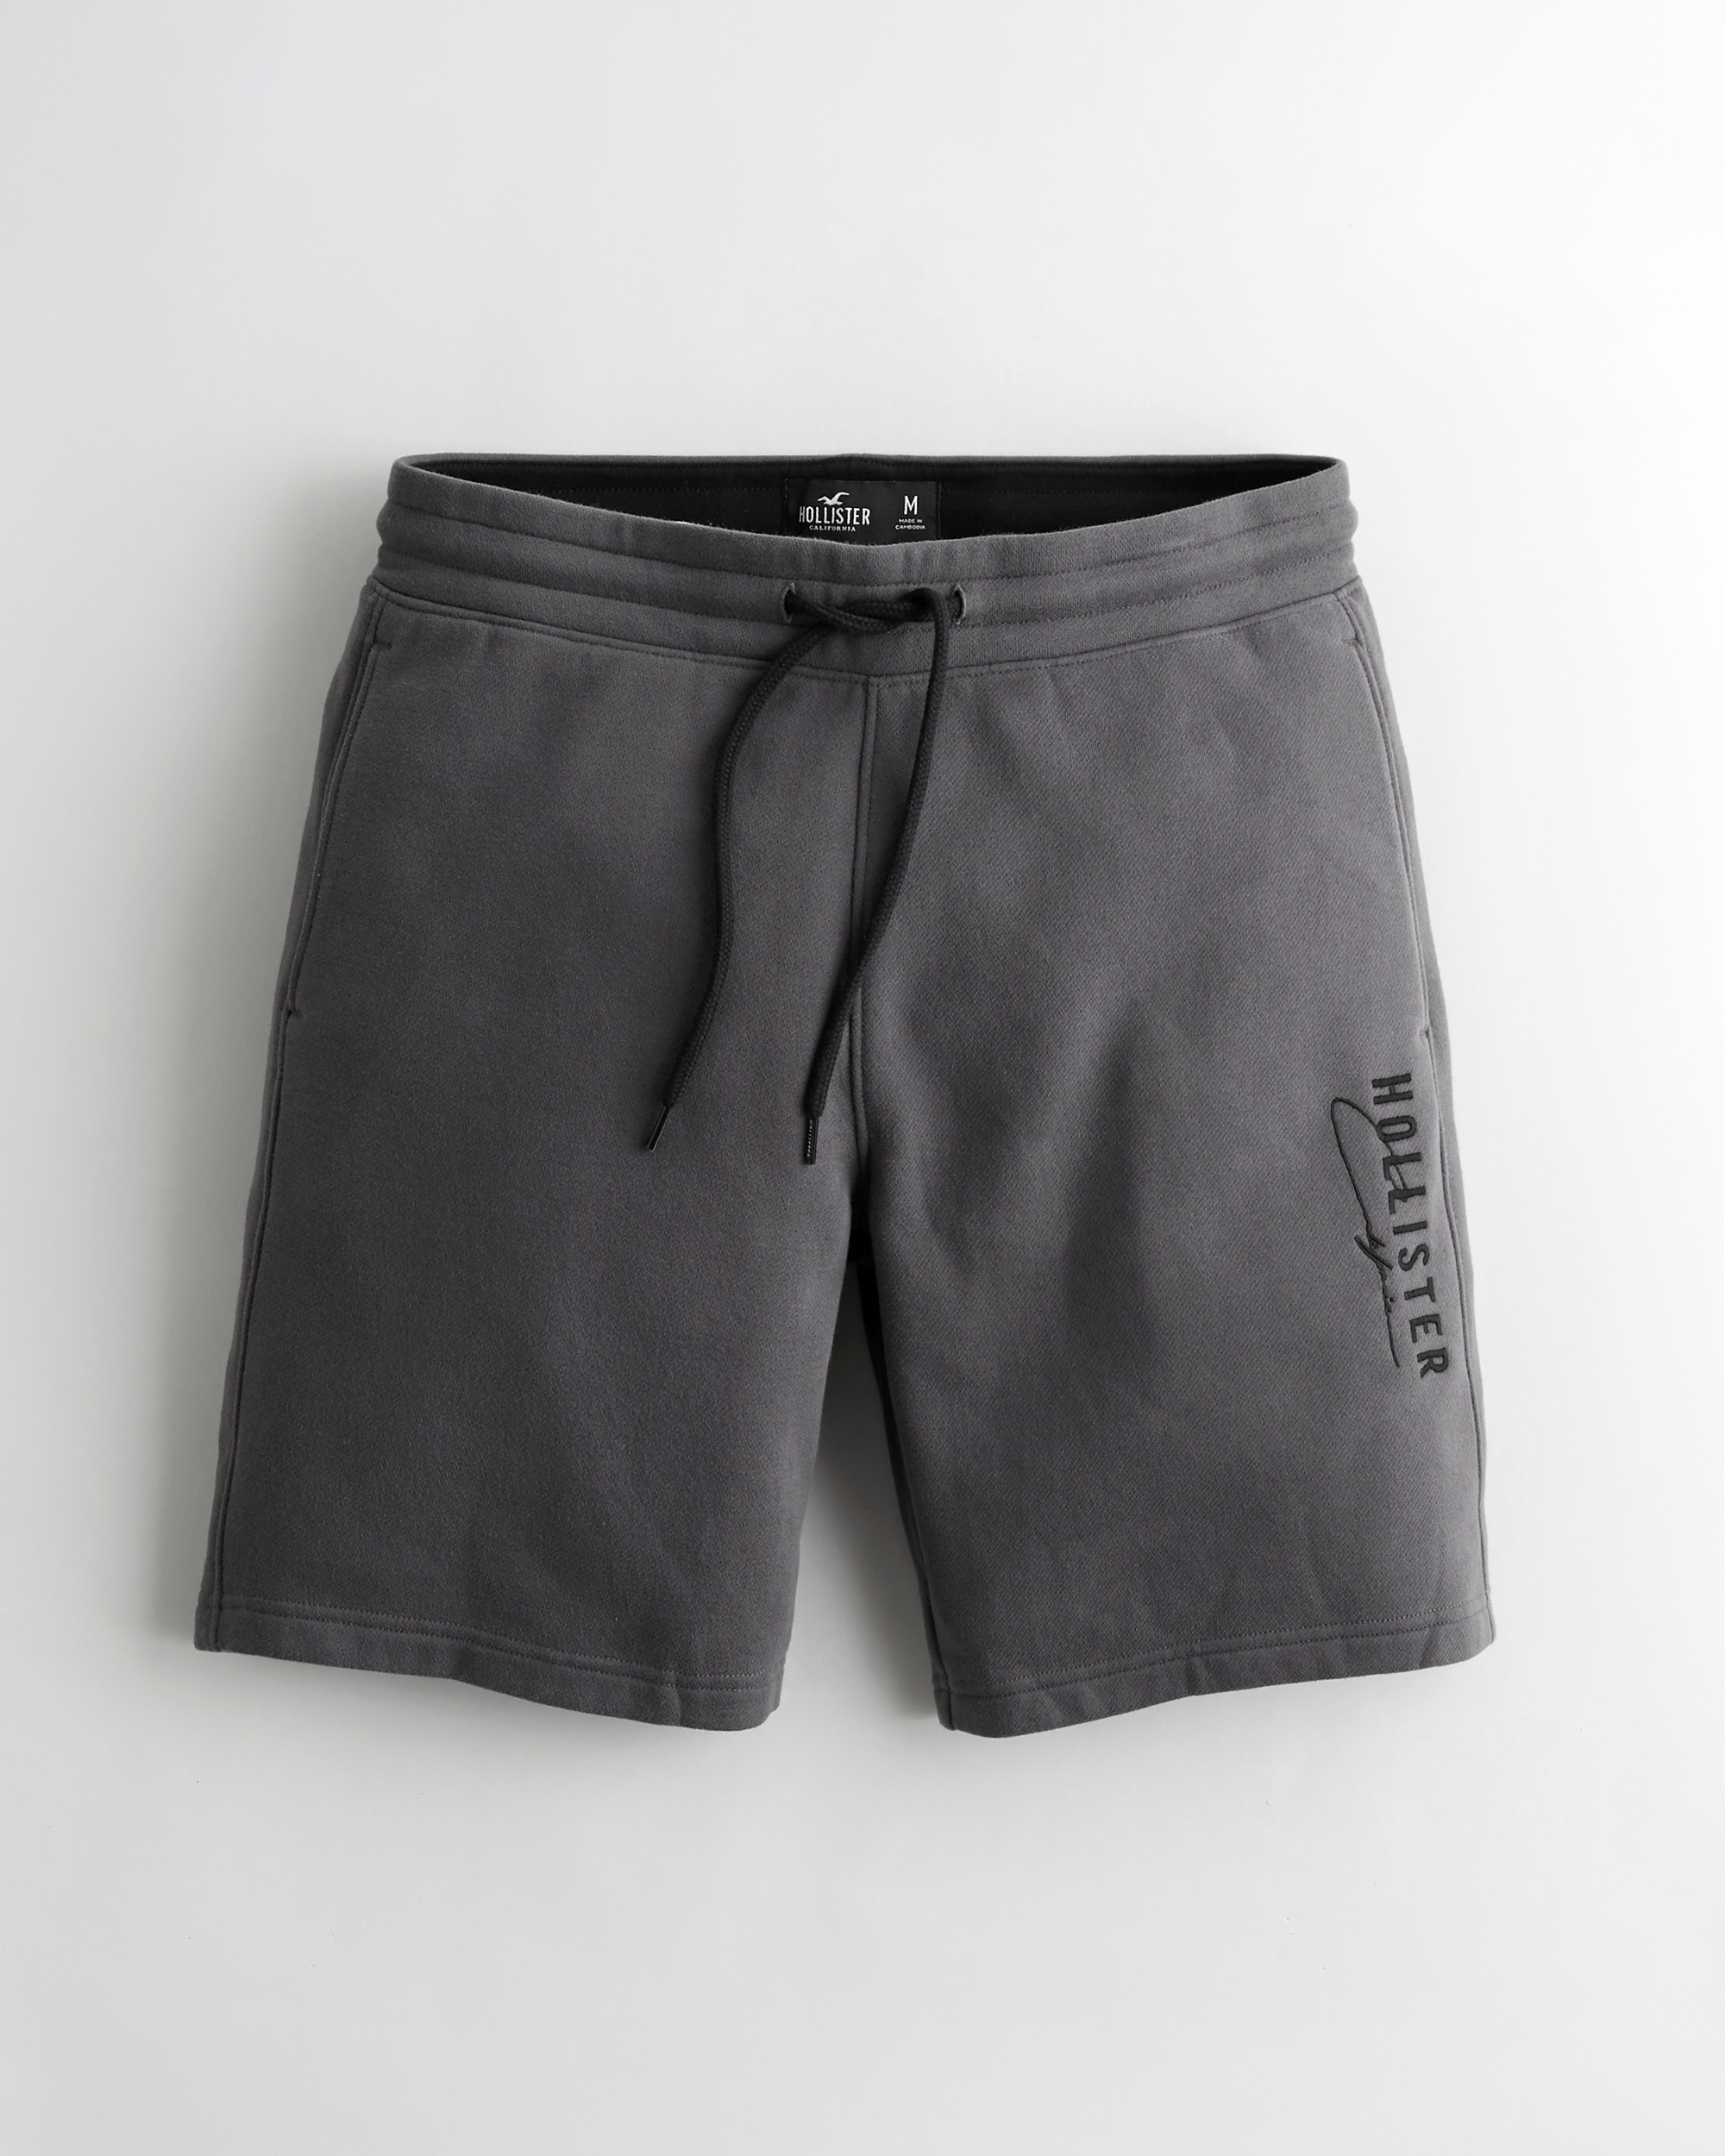 hollister mens shorts clearance